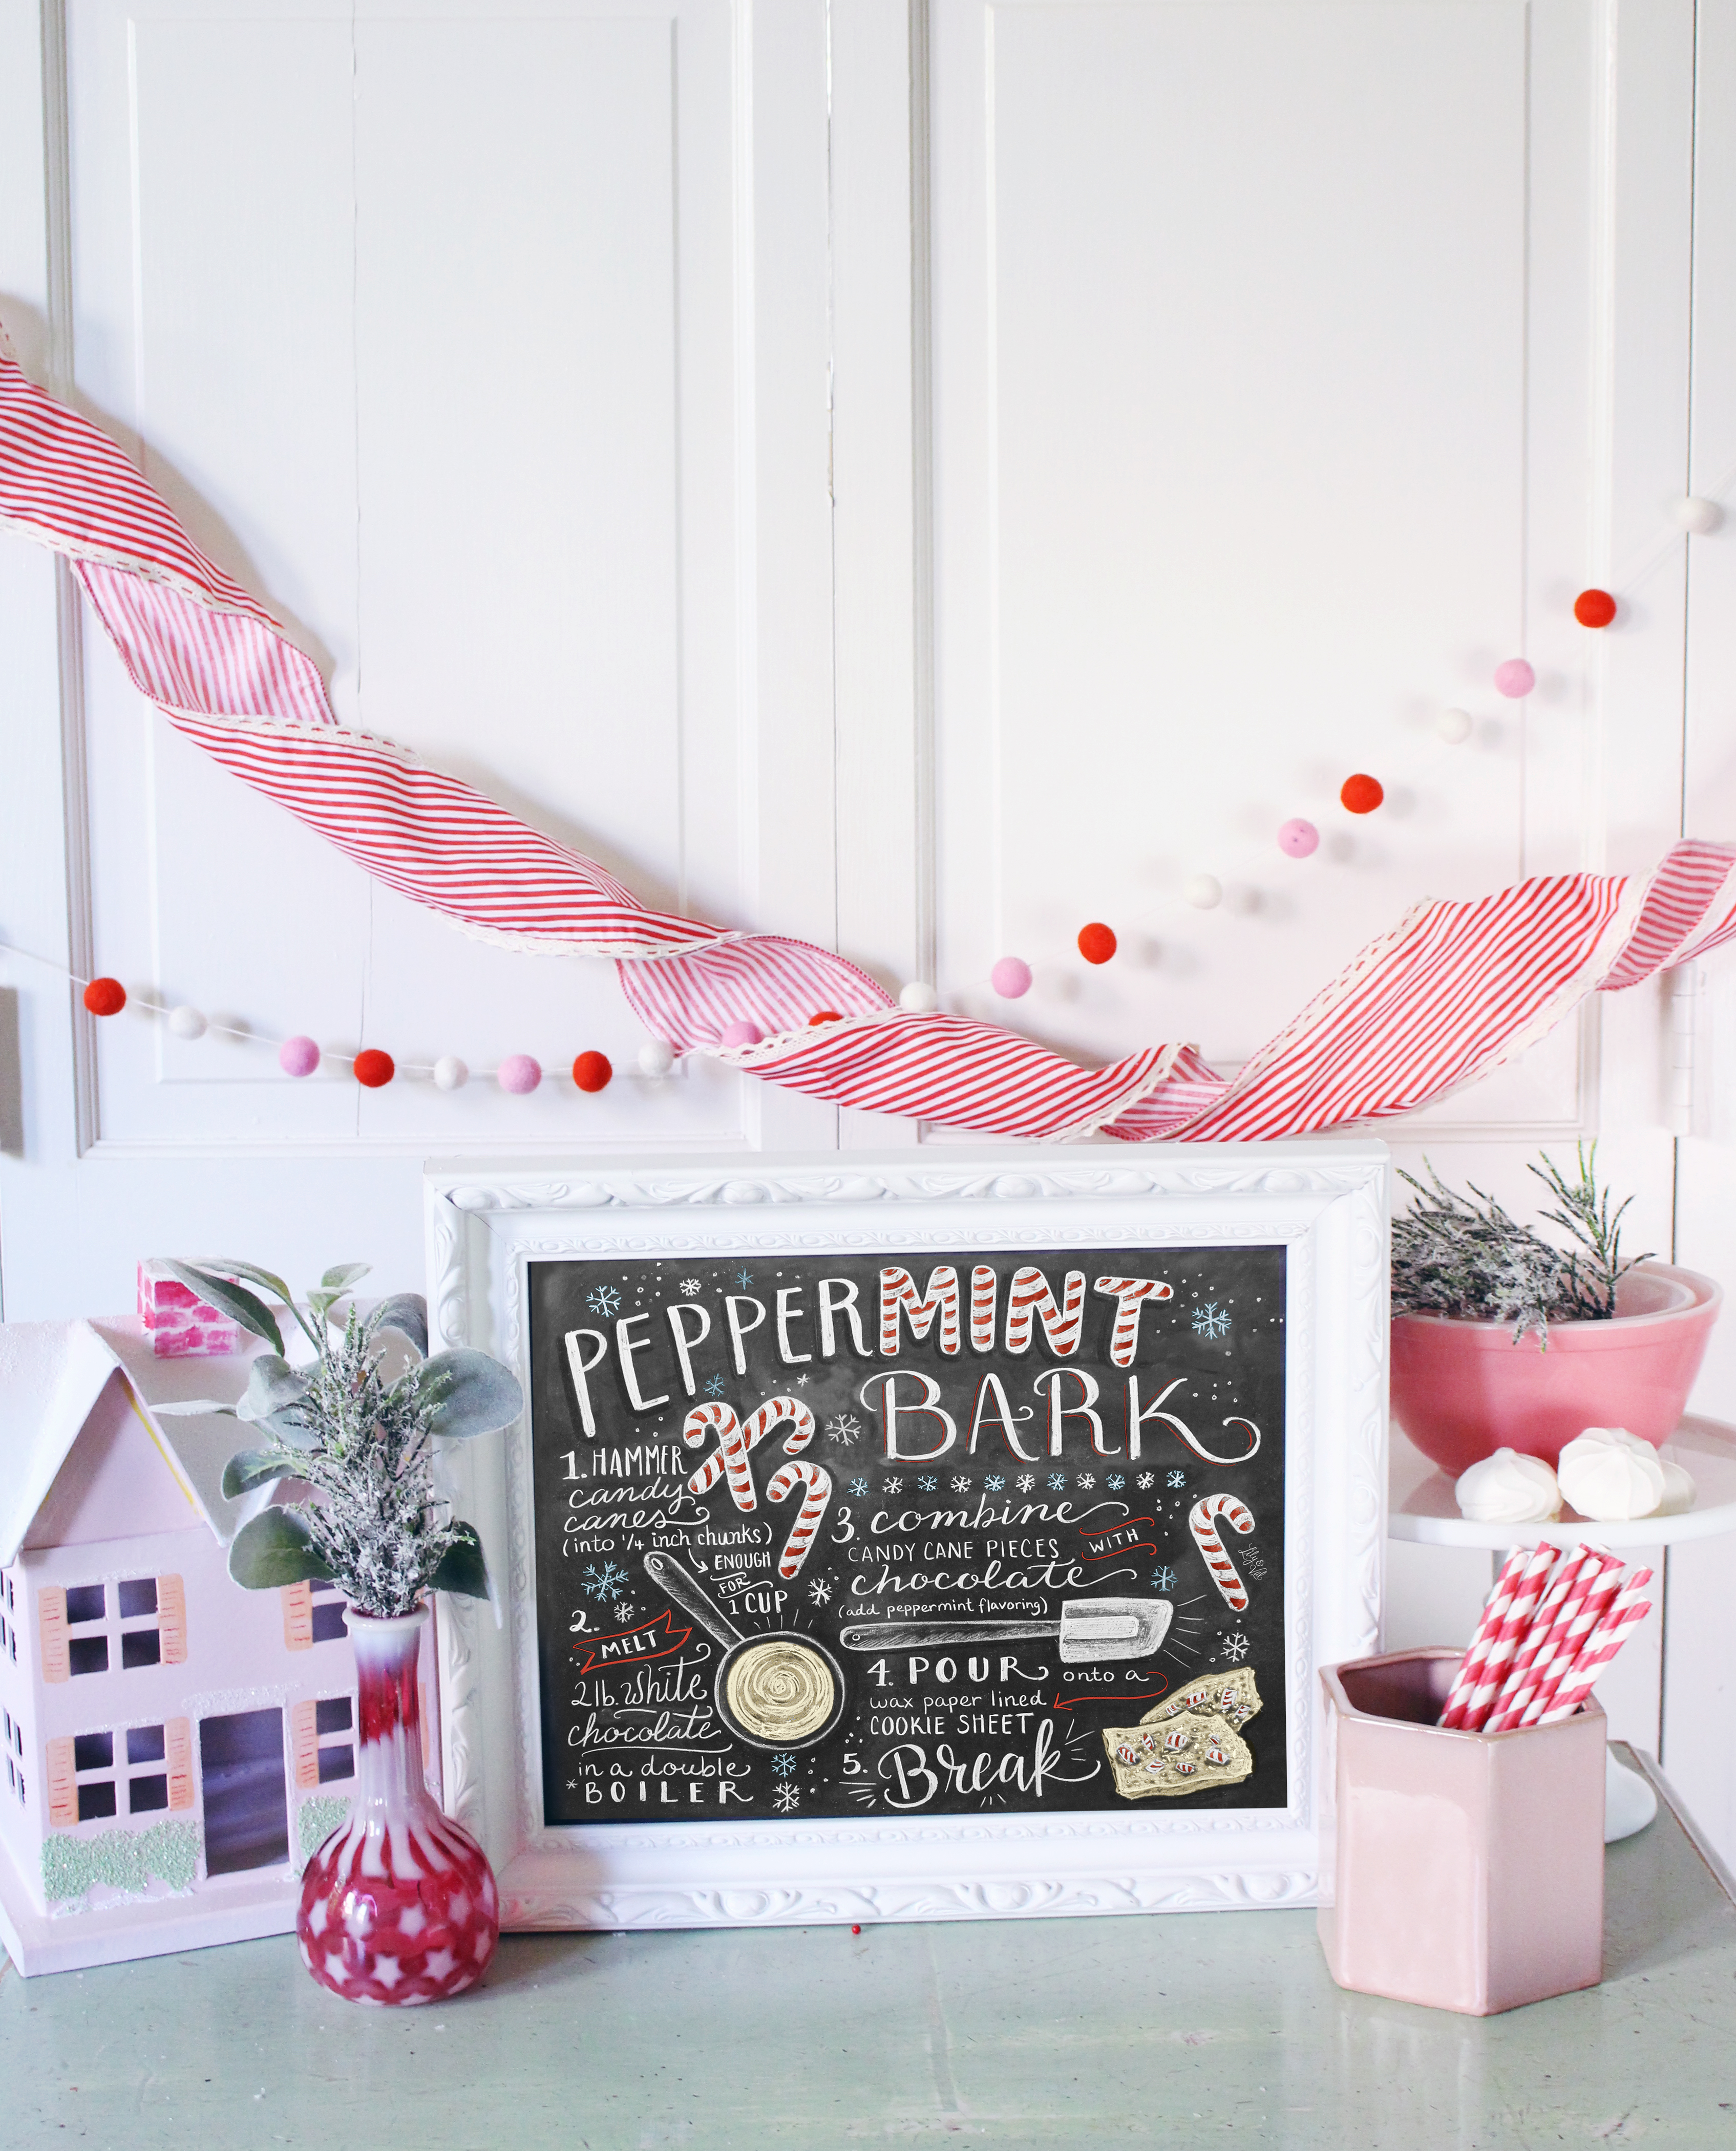 Peppermint Bark illustrated recipe by Lily &amp; Val as part of the 2016 Marshamallow World Holiday Wall Art &amp; Decor Collection